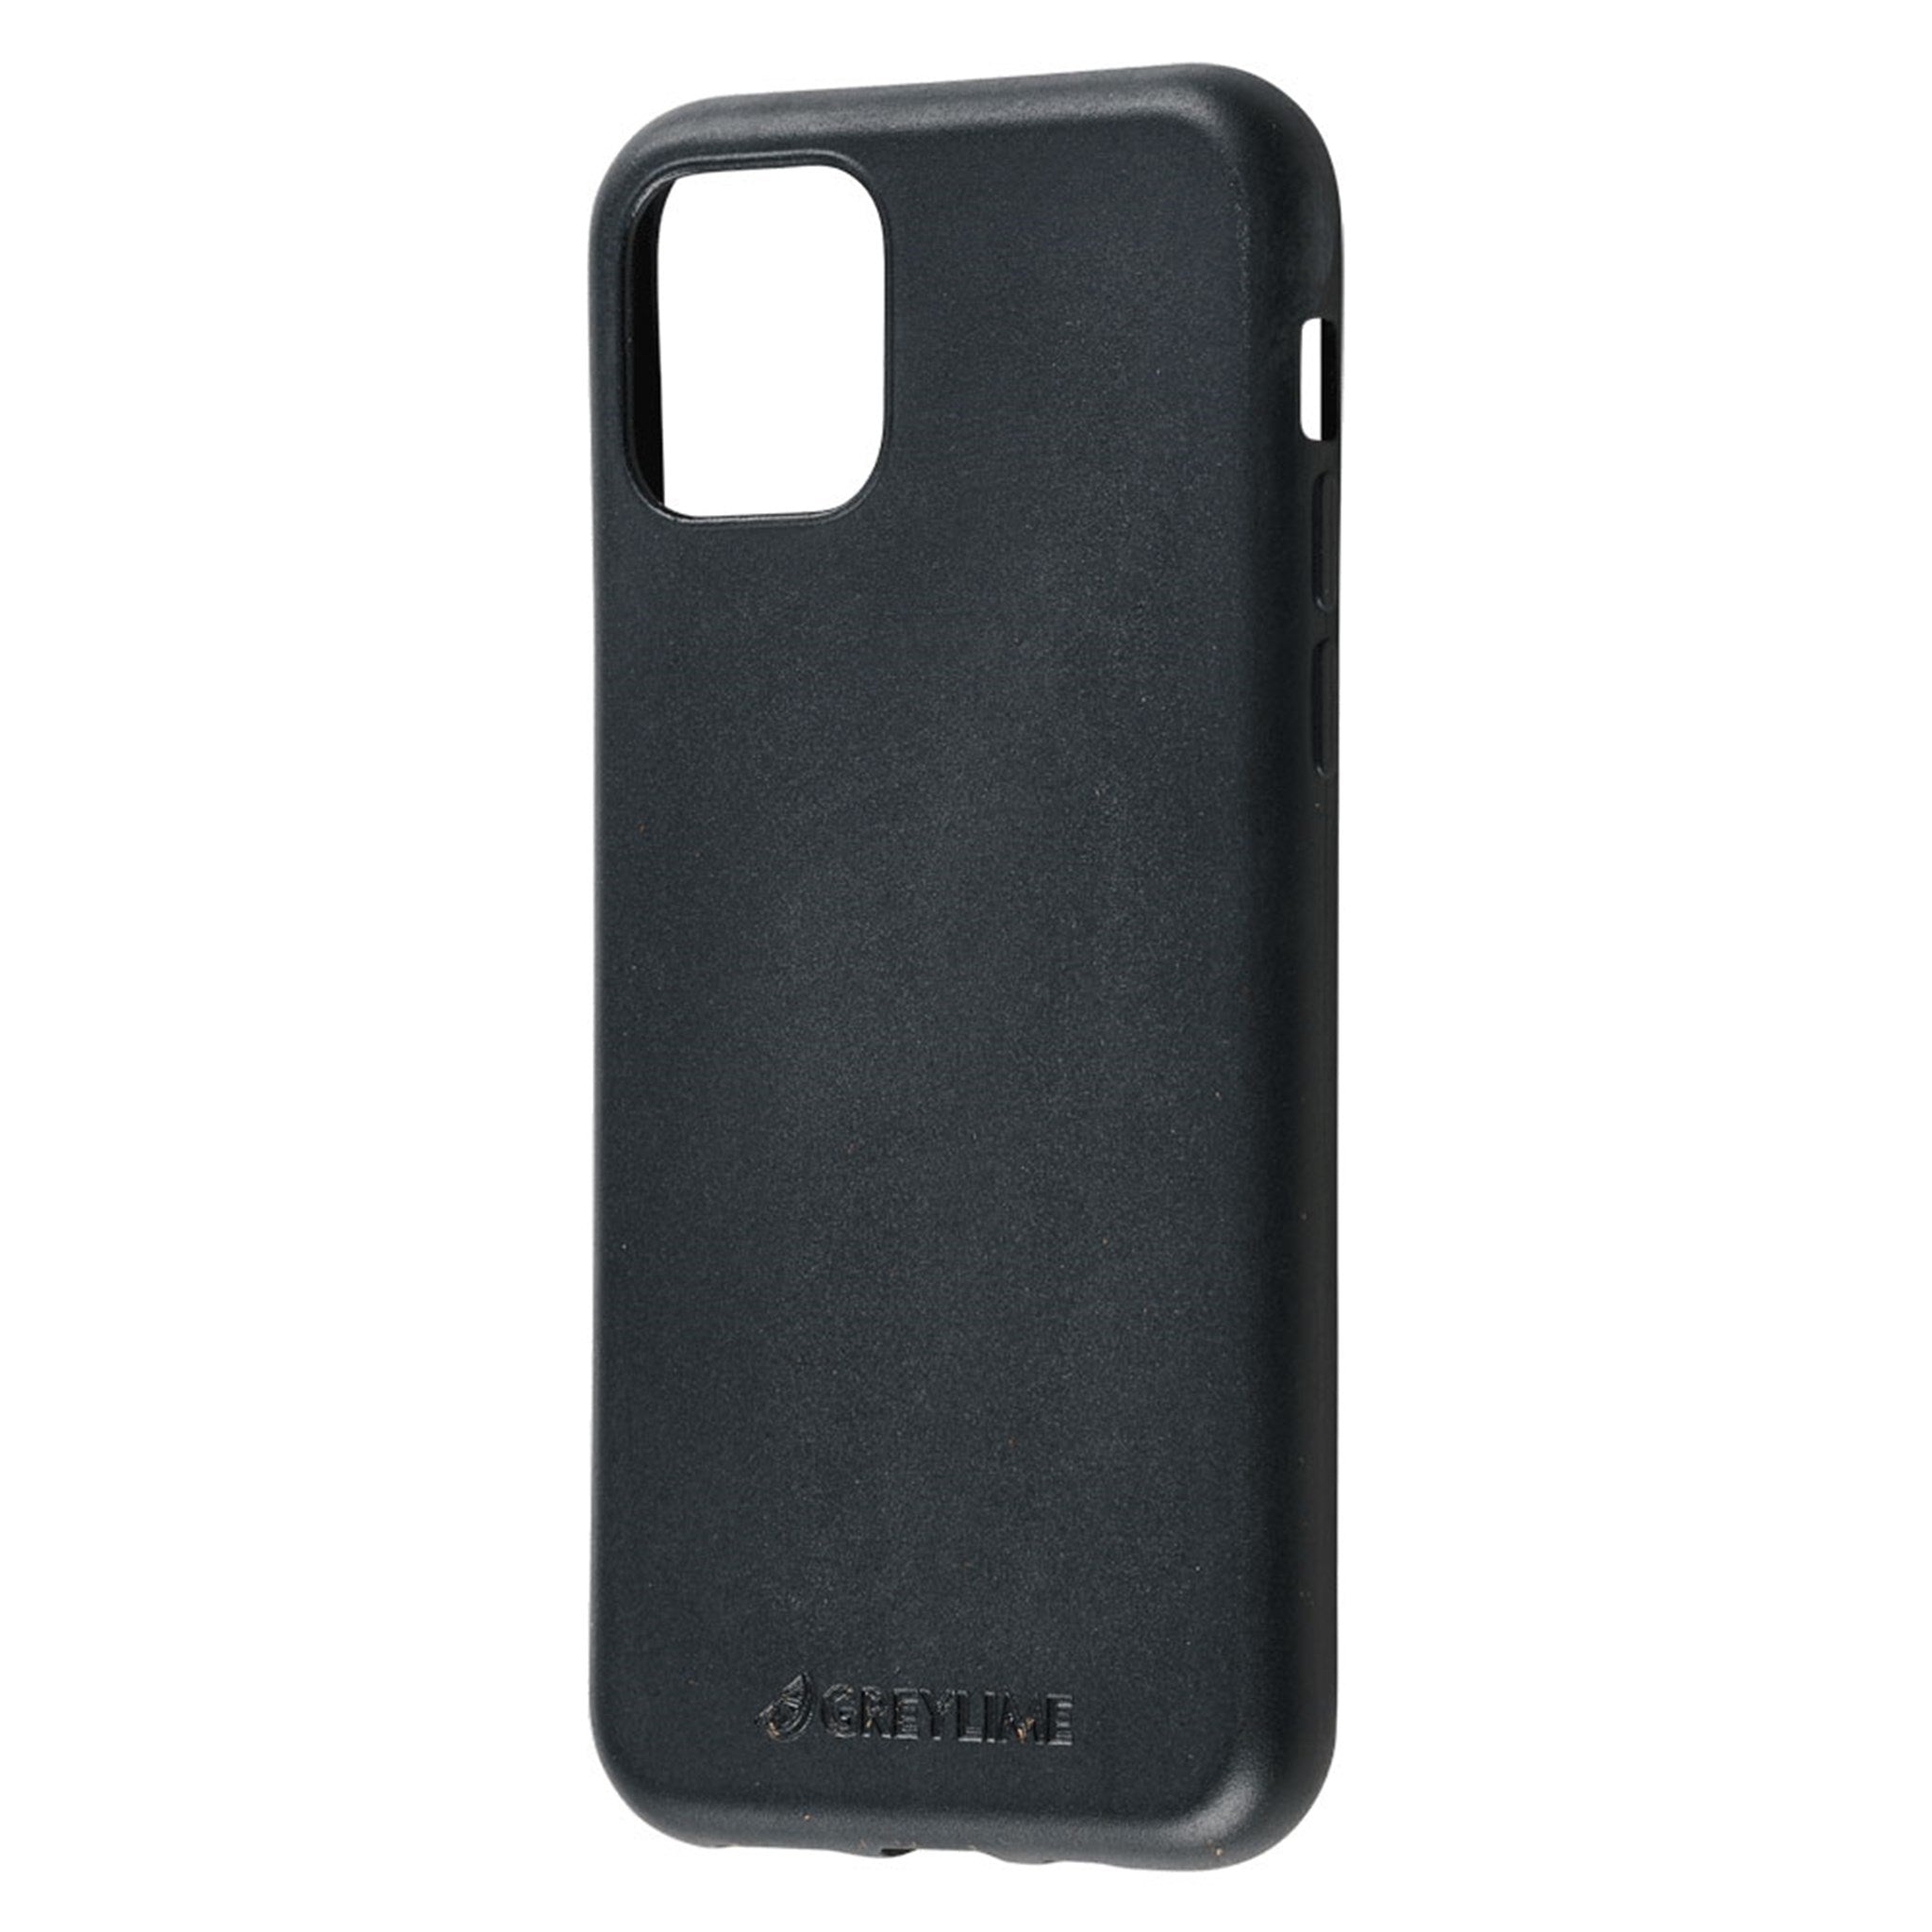 GreyLime-iPhone-11-Pro-Max-biodegradable-cover-Black-COIP11PM01-V2.jpg